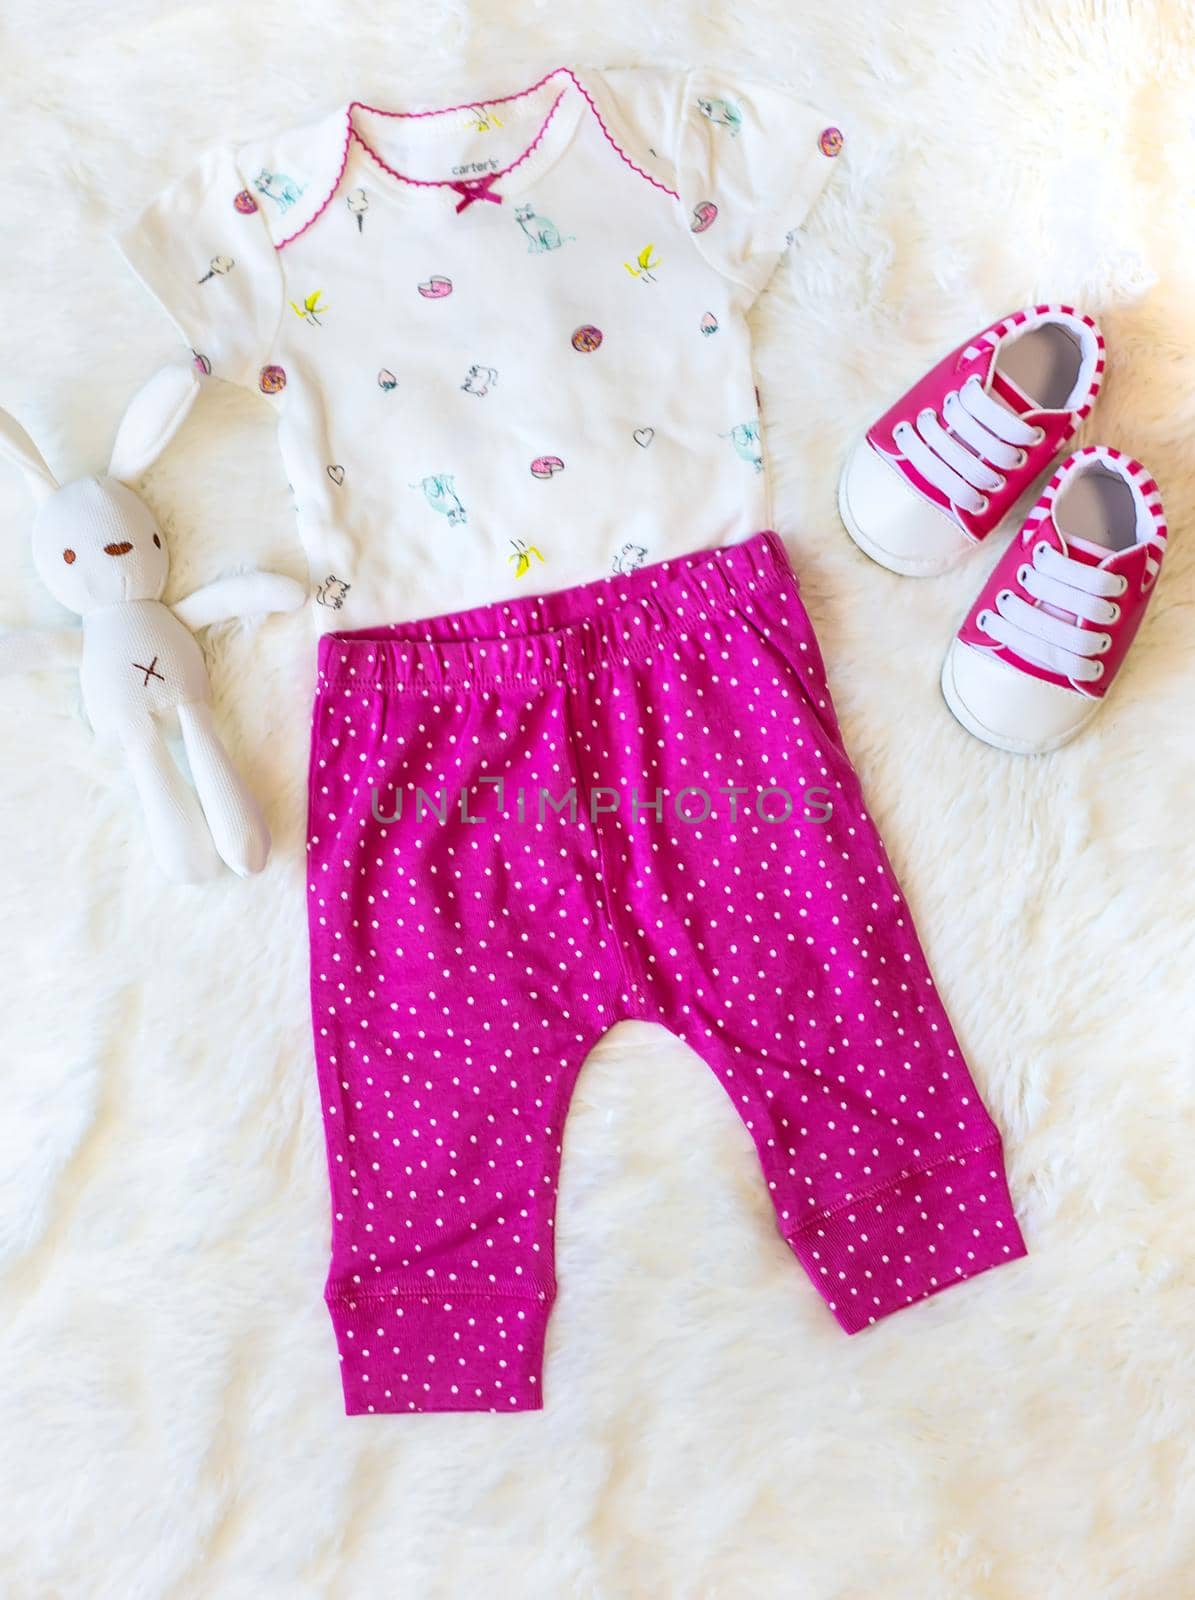 Clothing for young and newborns. Selective focus. by yanadjana